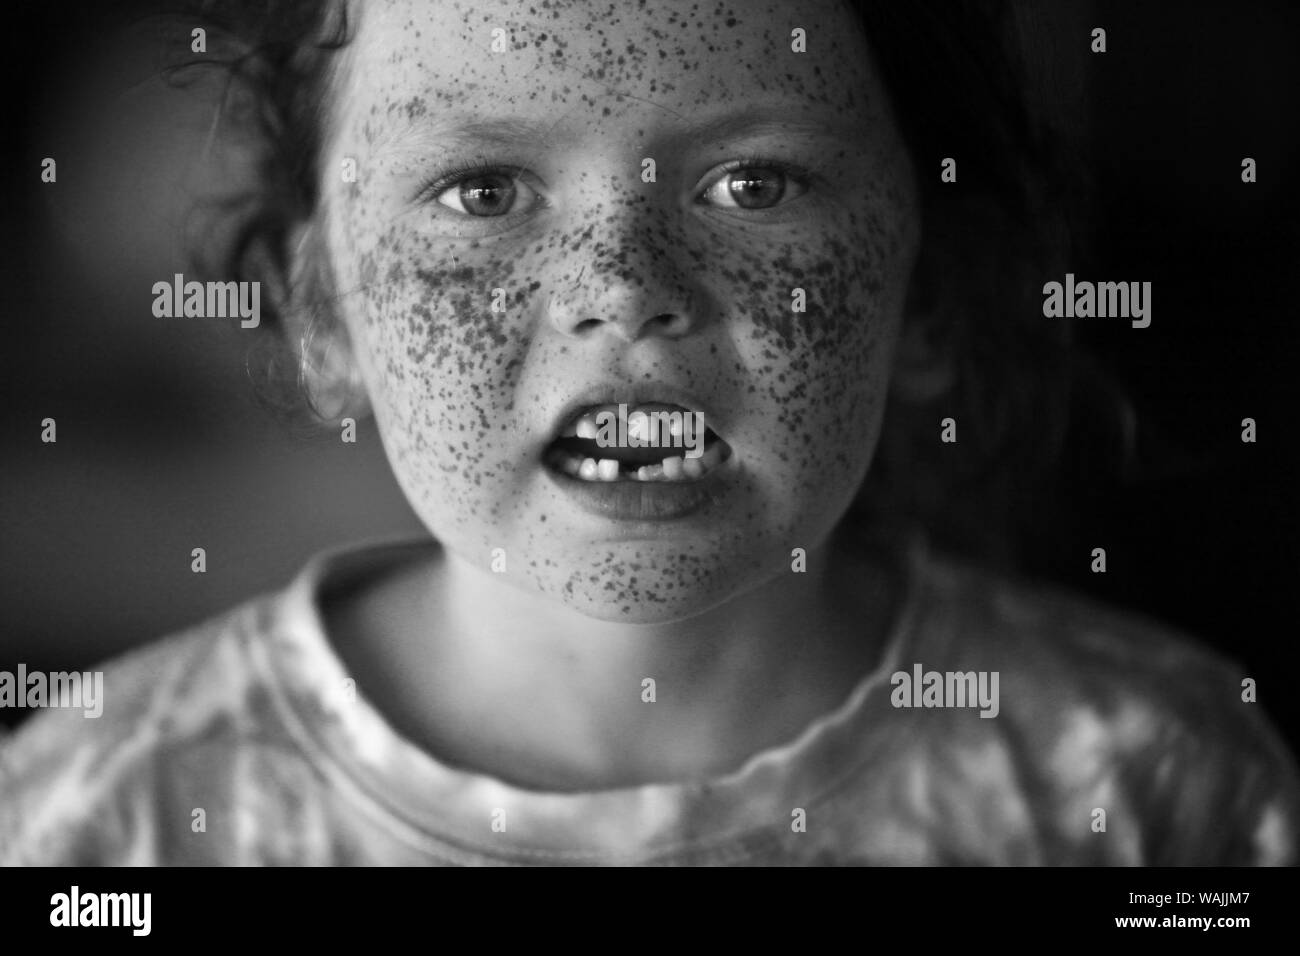 A beautiful girl with missing teeth and freckles. Stock Photo